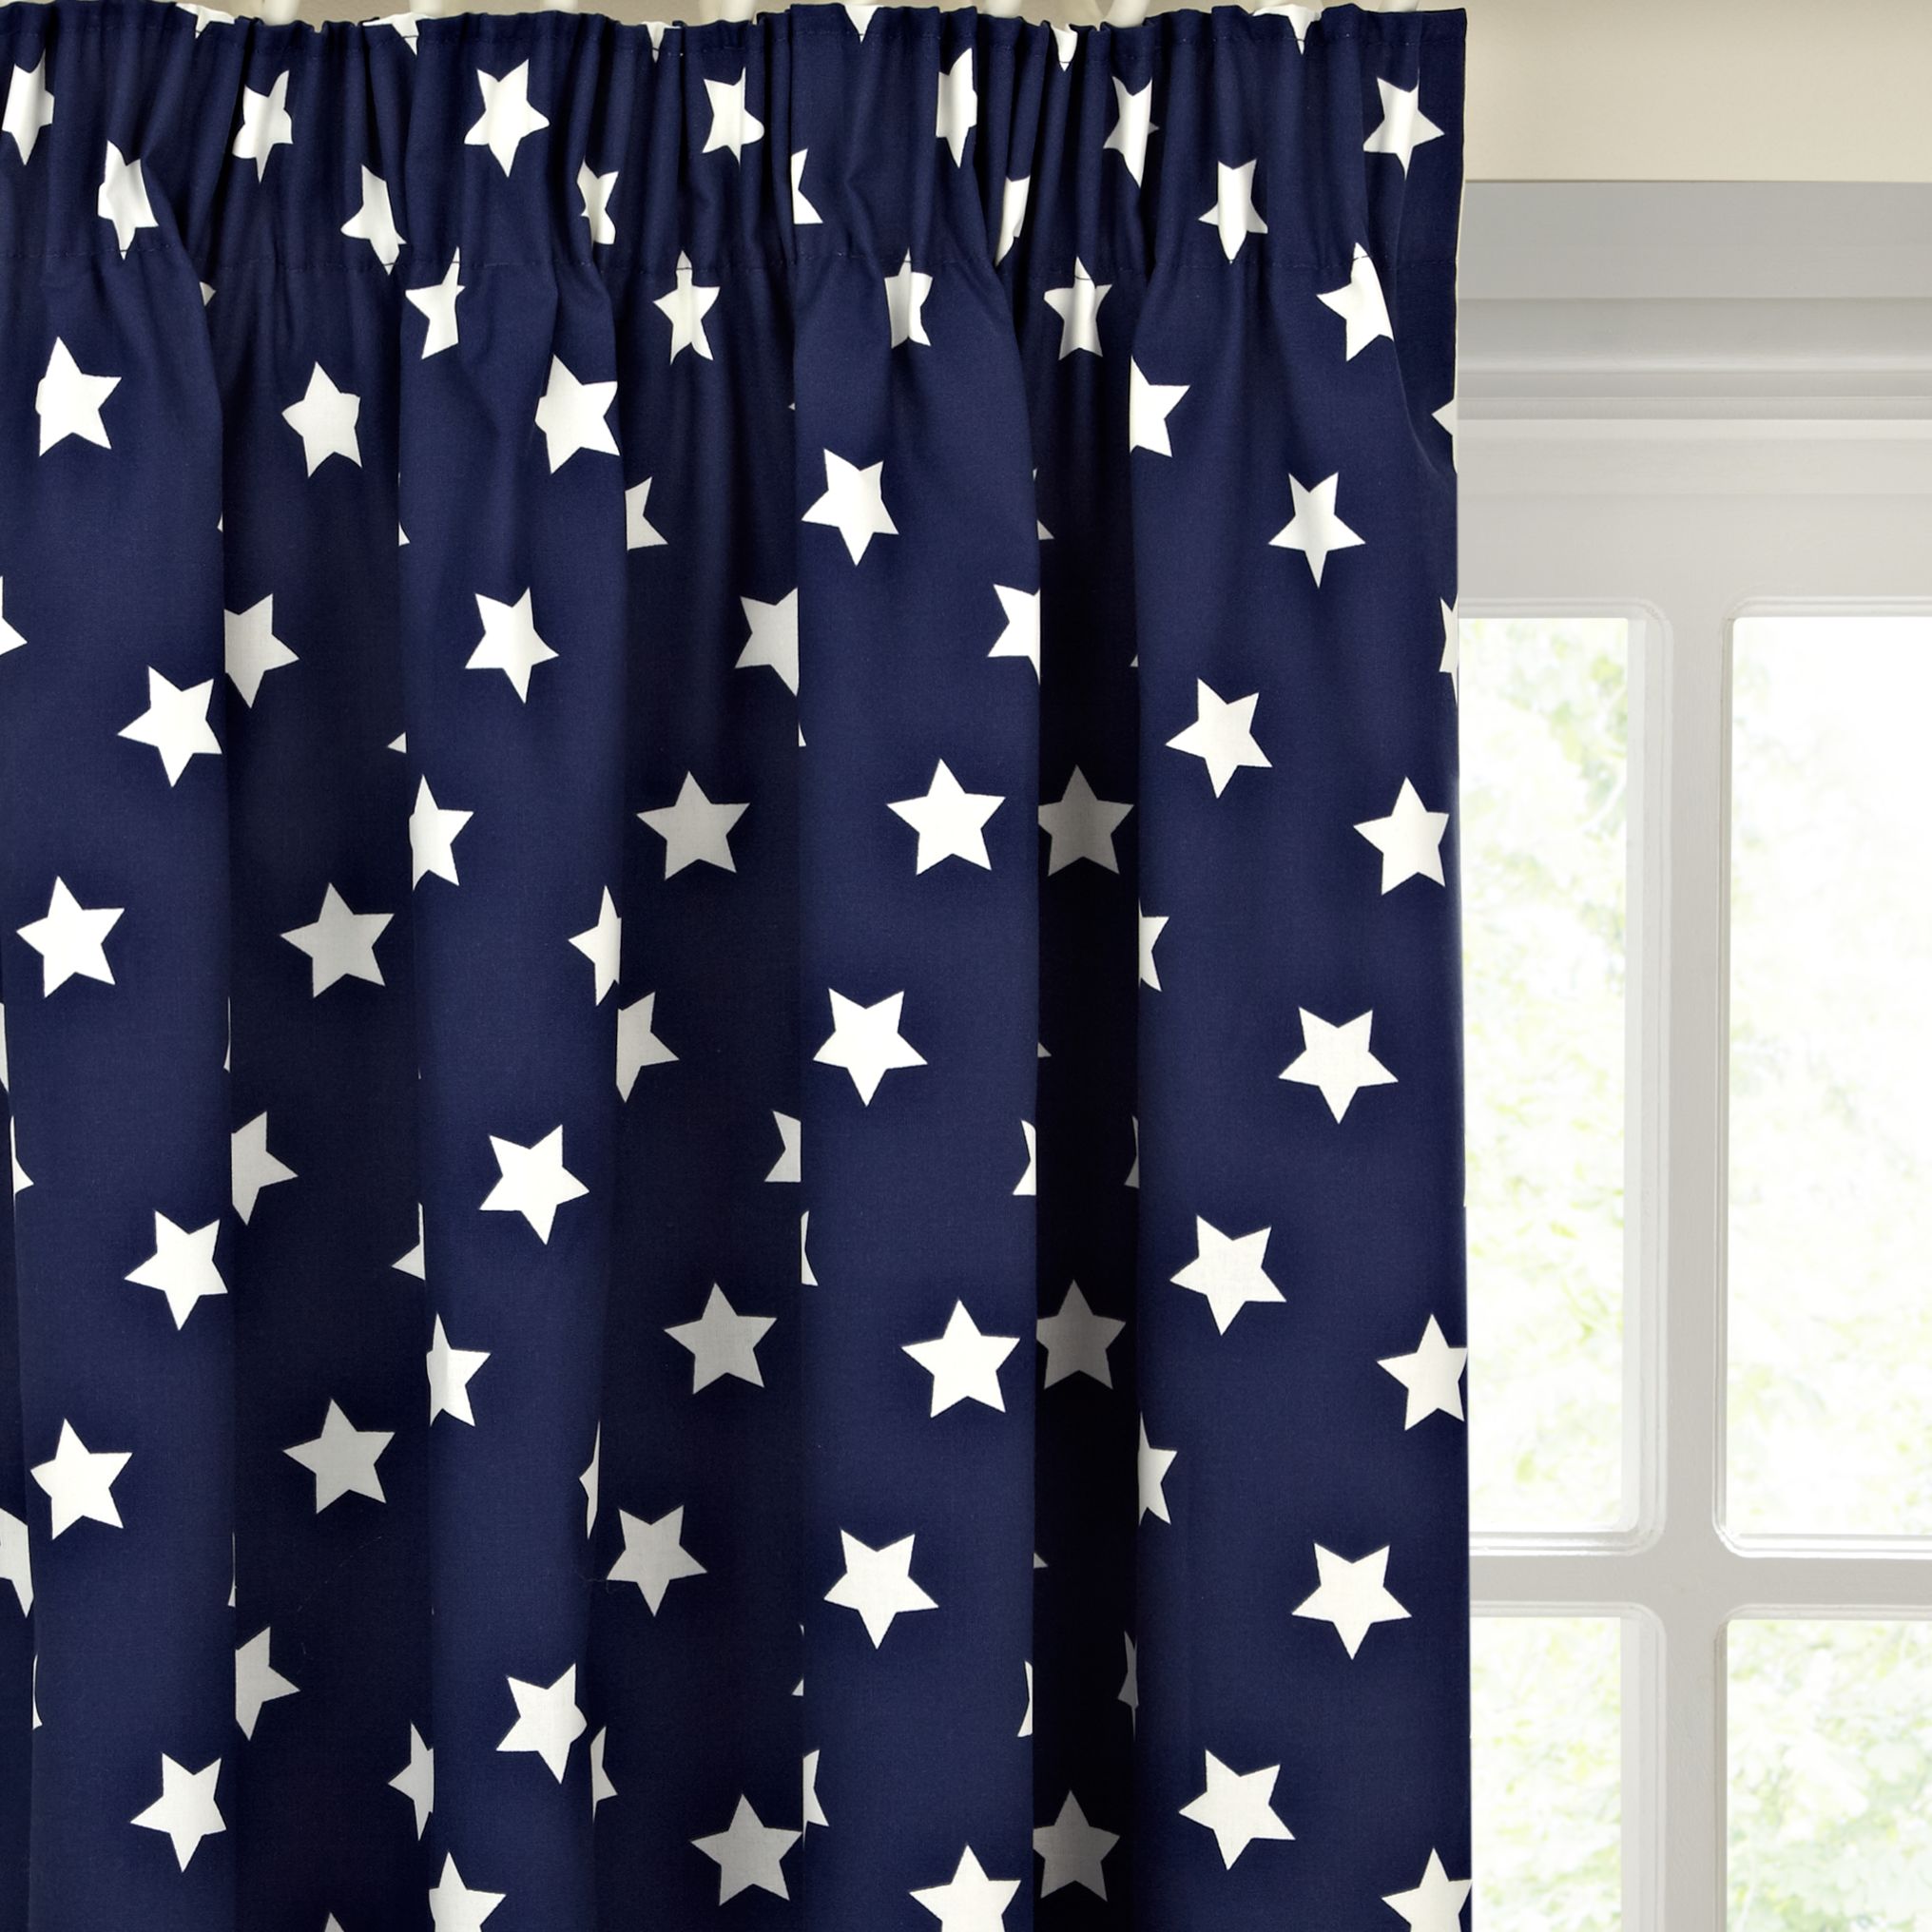 little home at John Lewis Glow in the Dark Star Pair Blackout Lined Pencil Pleat Children's Curtains, Navy